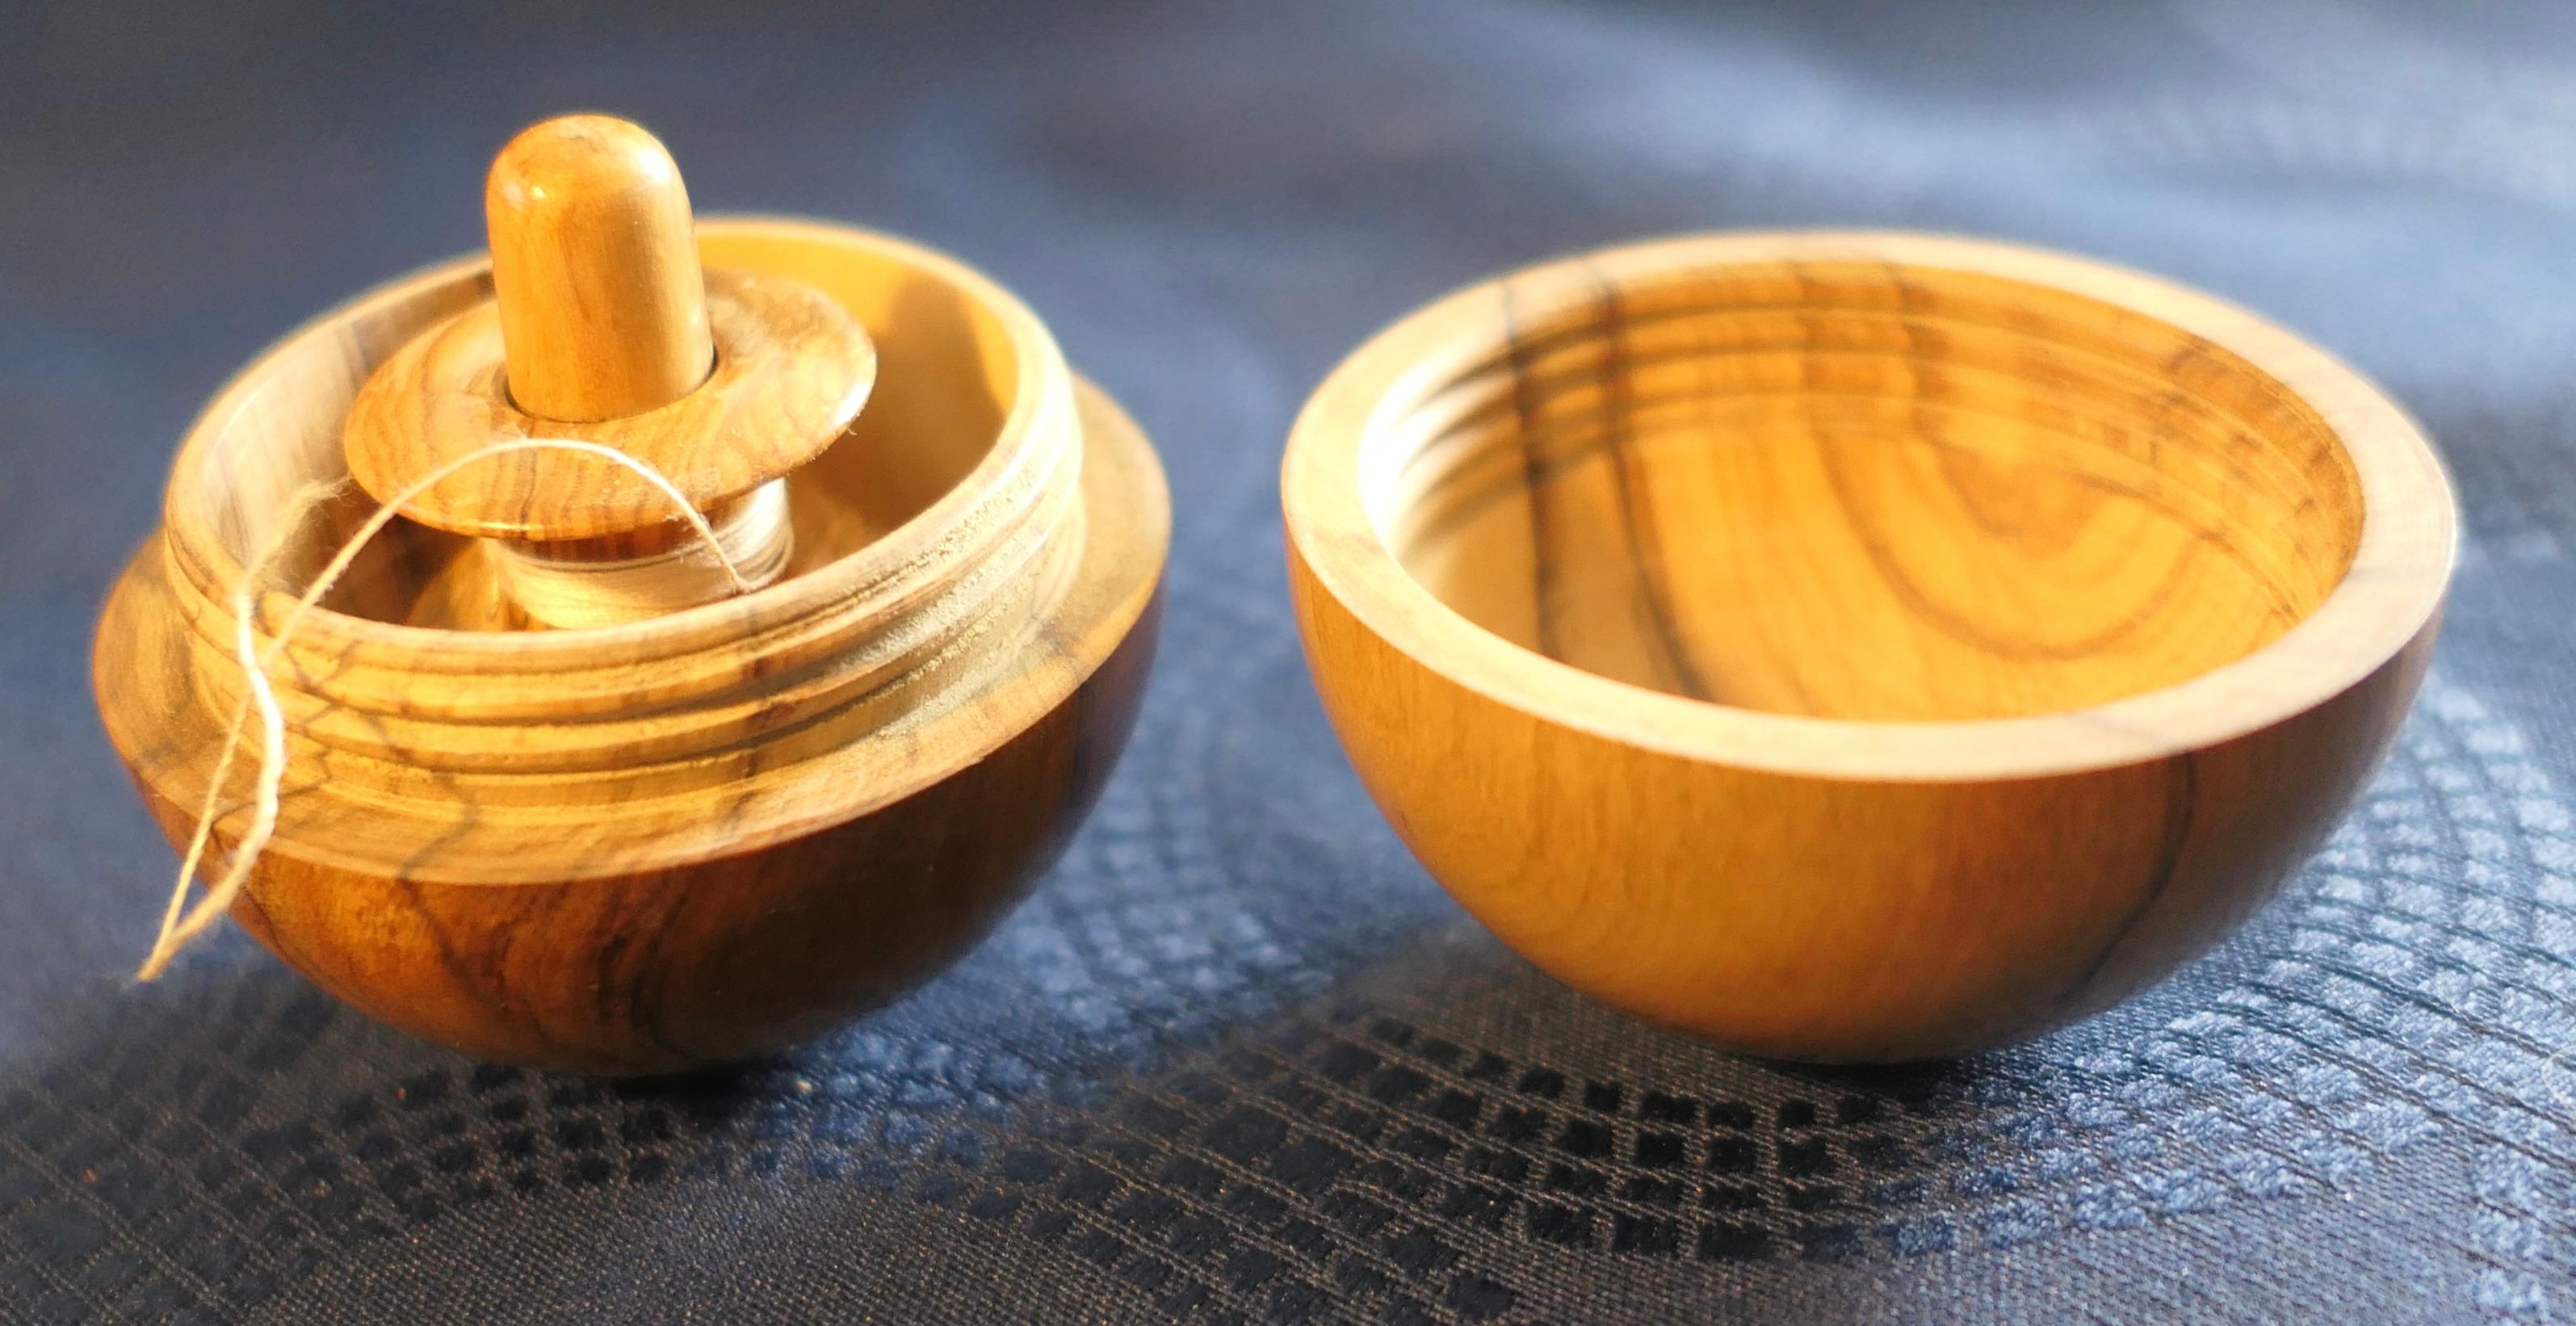 A Treen Sphere Enclosing Needle and Thread Spool

A wonderful piece when unscrewed to open it reveals inside a needle case at the centre and a double thread spool which slips over it
Beautifully and skilfully turned from olive wood 
The closed